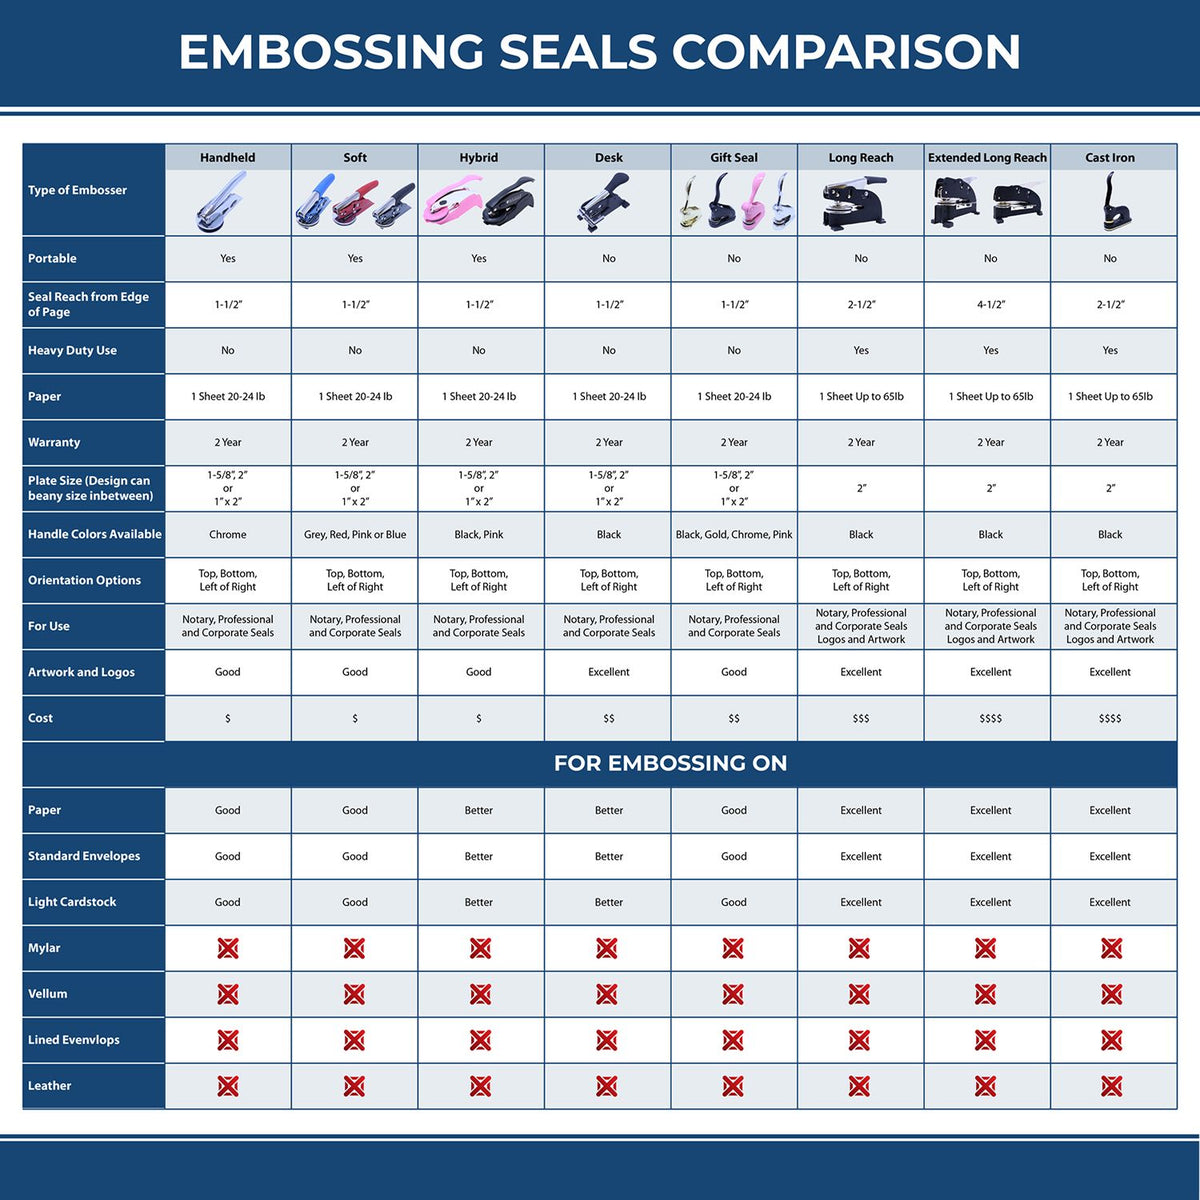 A comparison chart for the different types of mount models available for the Long Reach Georgia Land Surveyor Seal.